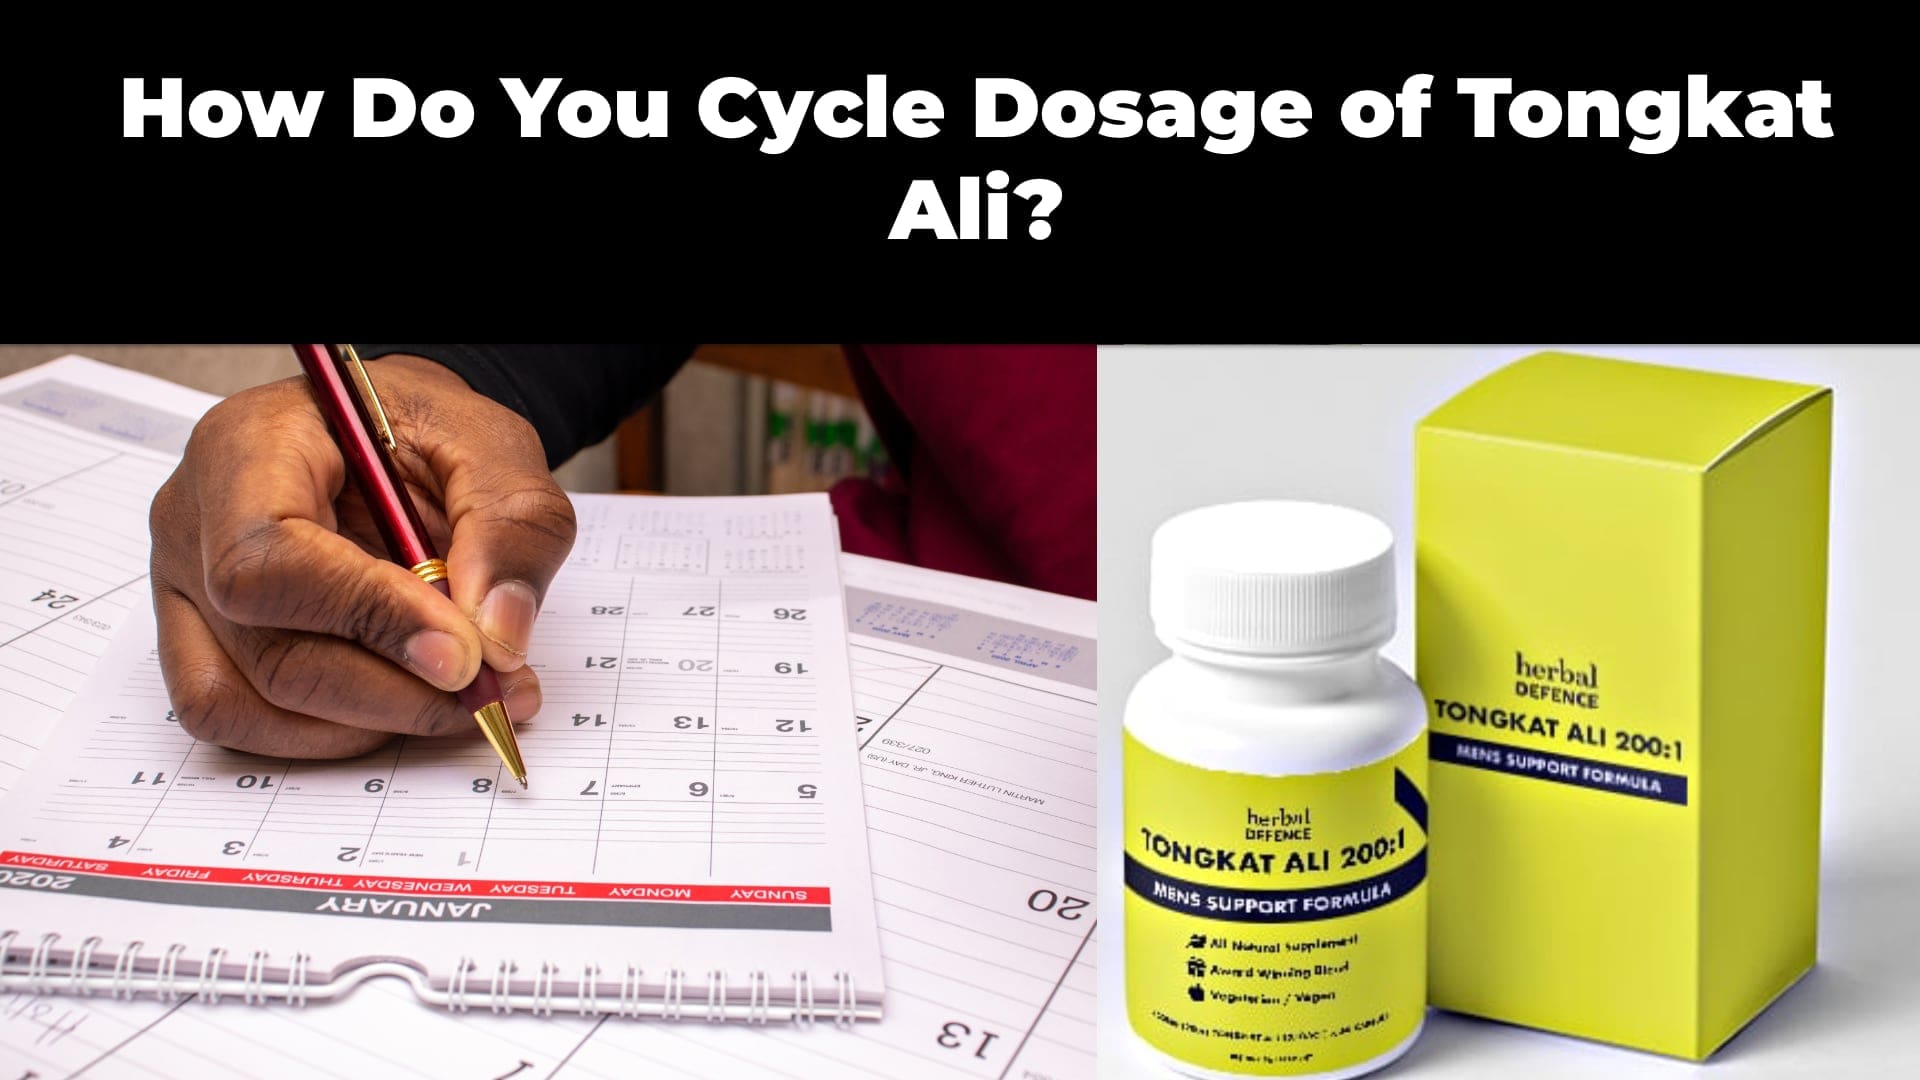 How Do You Cycle Dosage of Tongkat Ali?